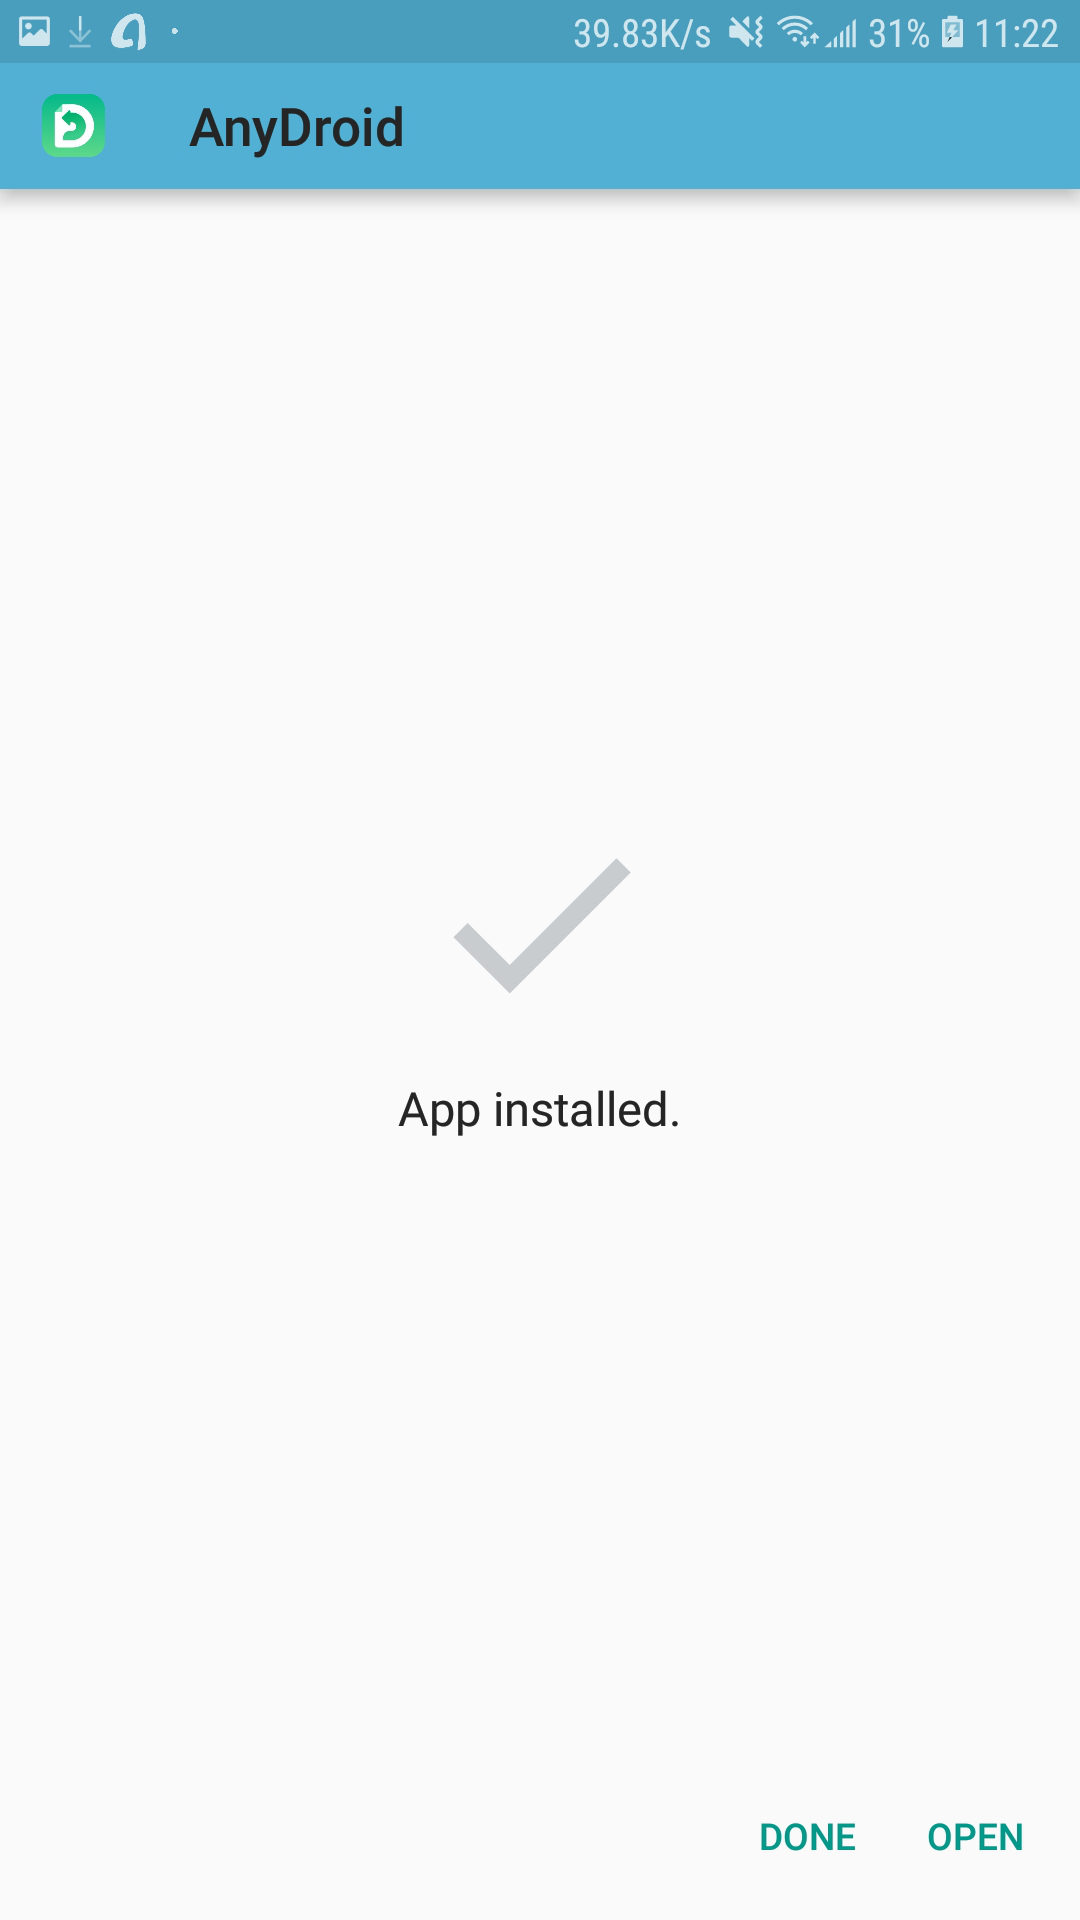 How to Do If AnyDroid Fails to Install Apk on Android Device – Step 6